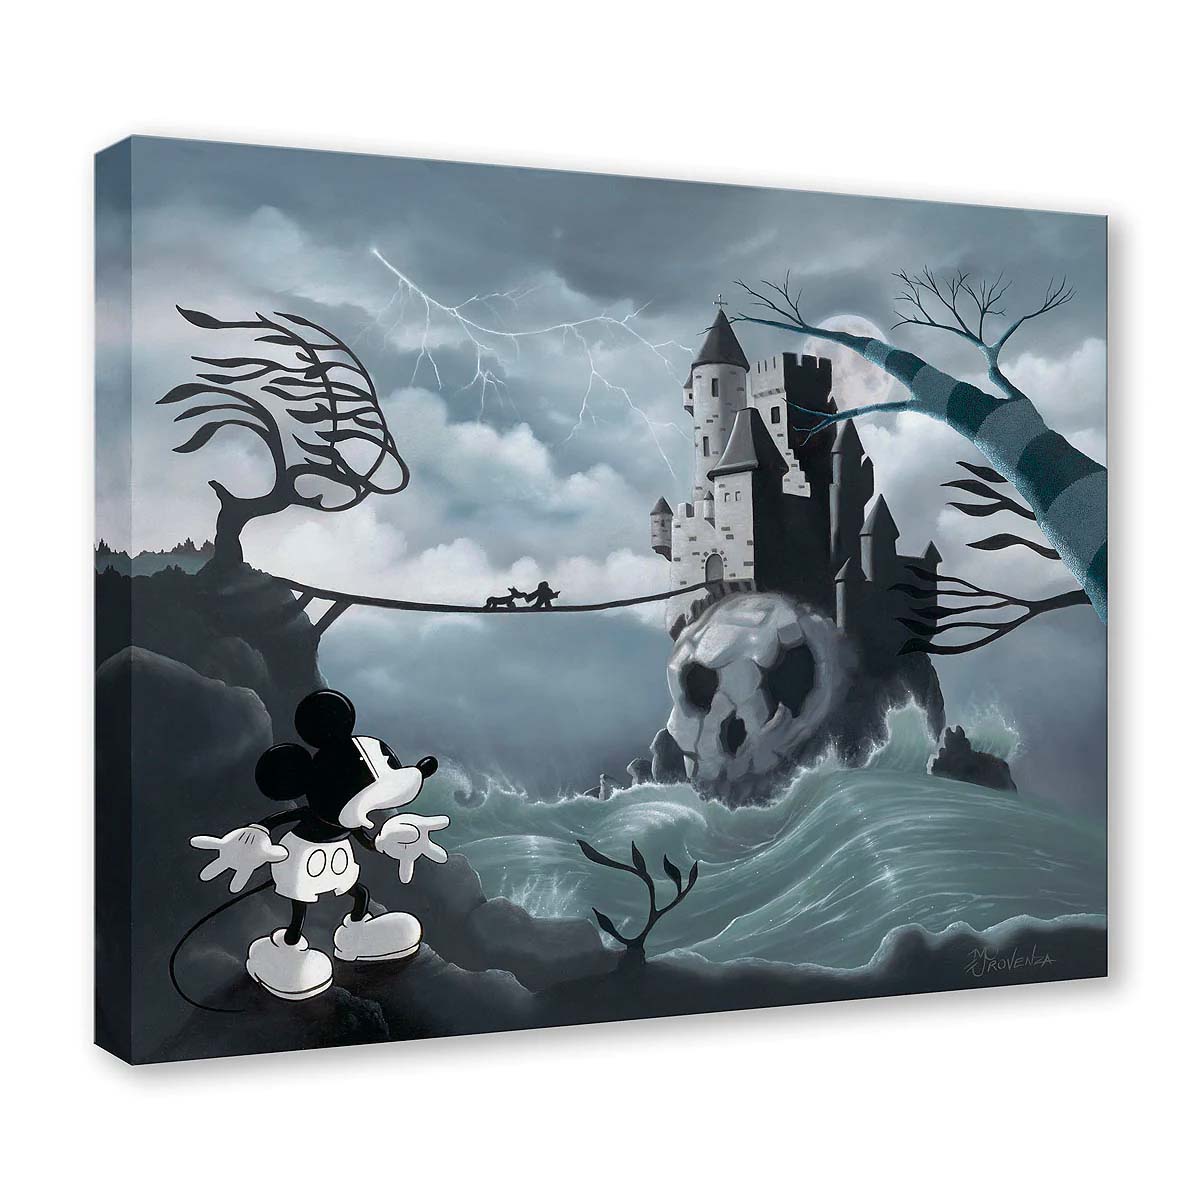 Michael Provenza Disney "One Stormy Night" Limited Edition Canvas Giclee